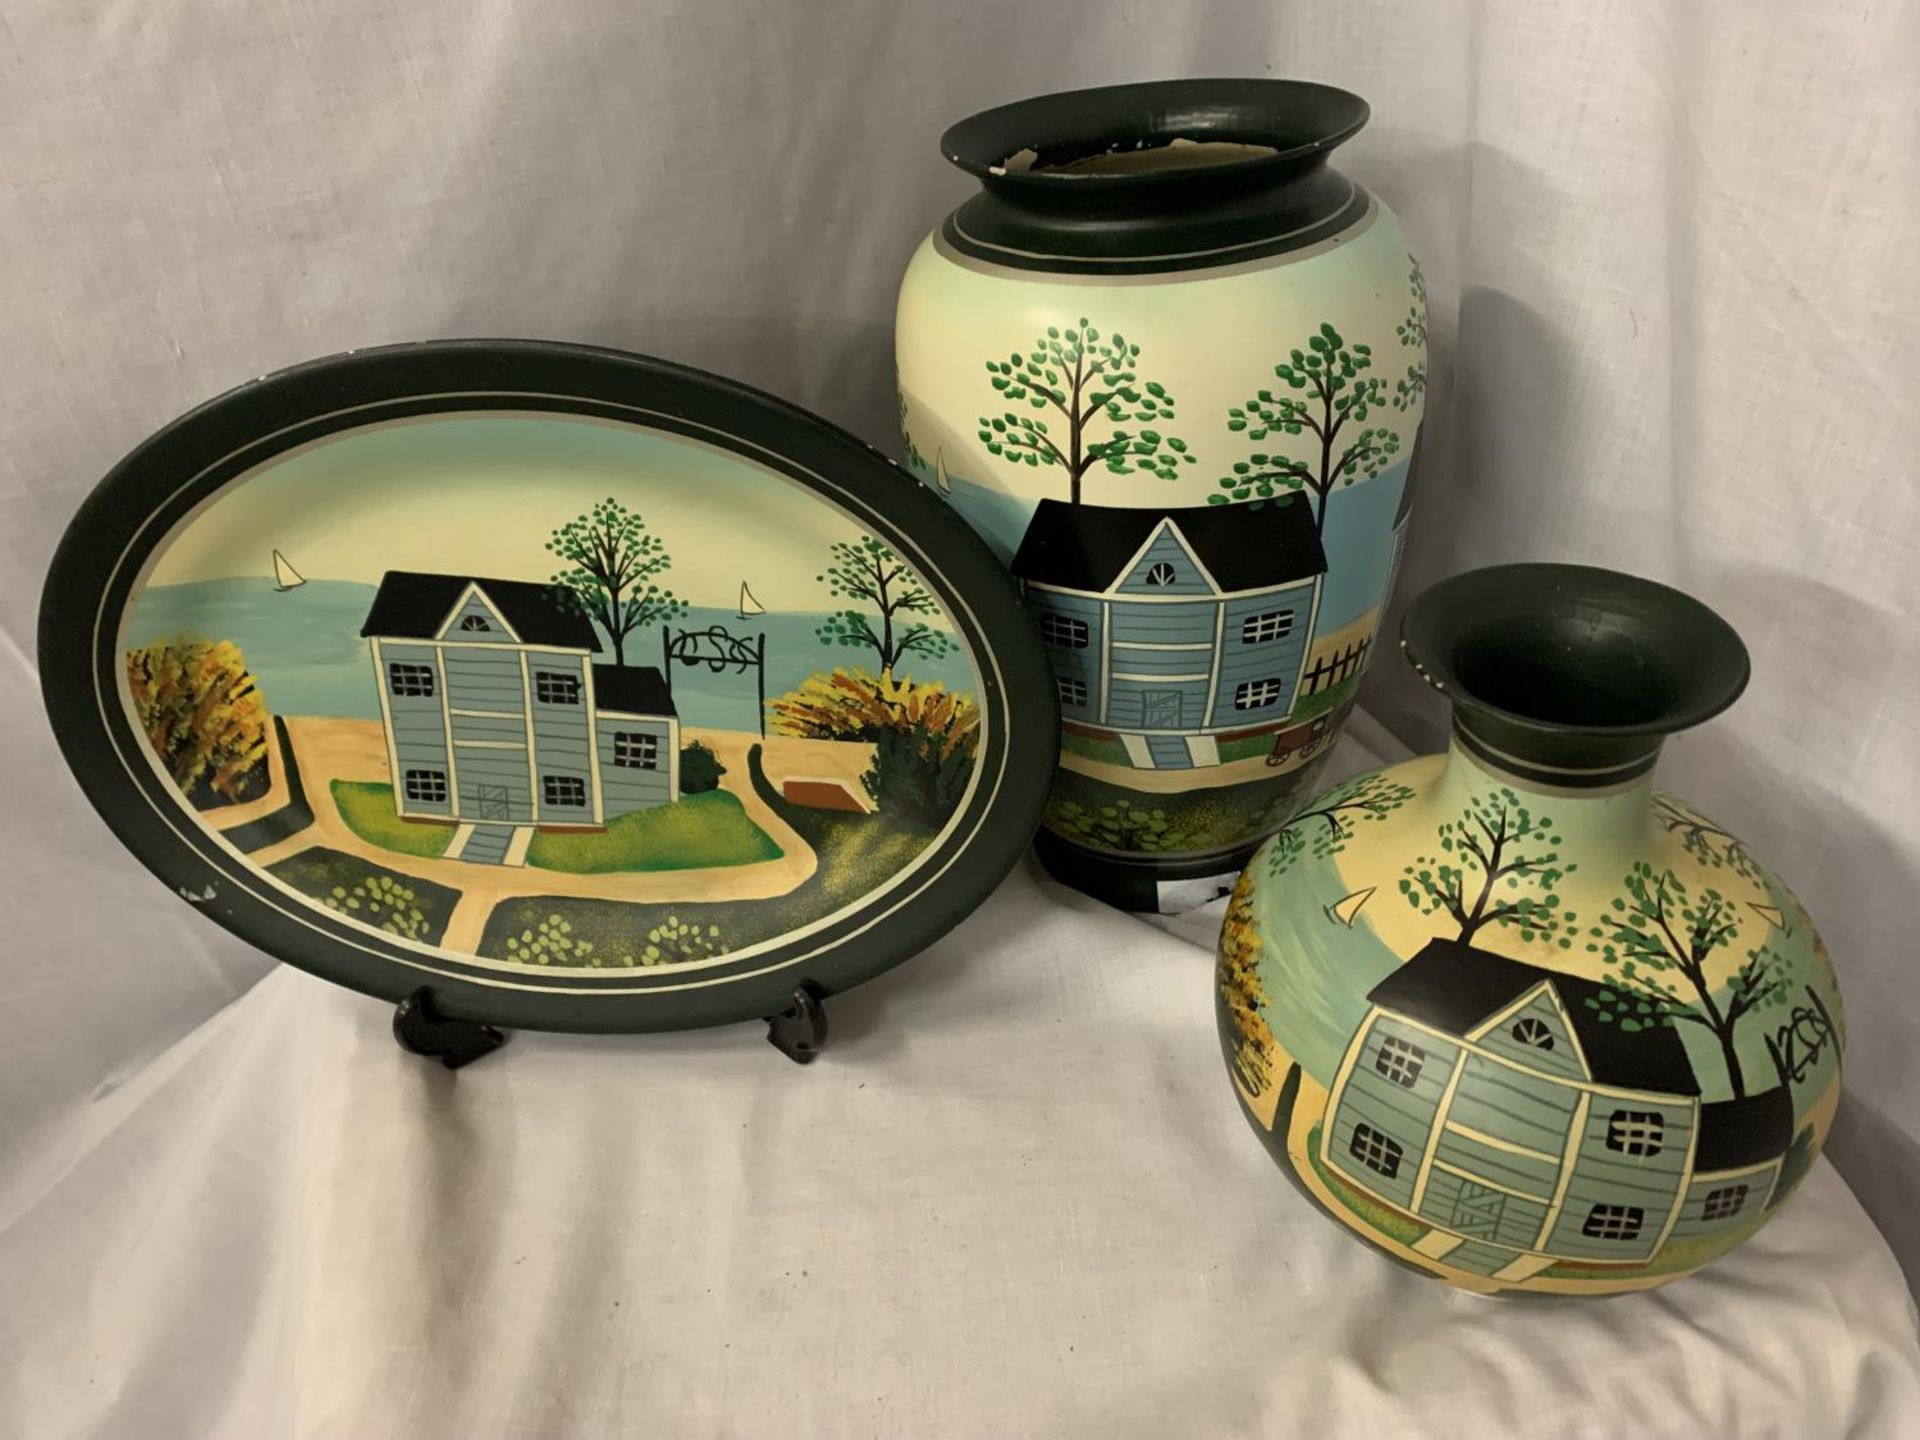 THREE VILLEROY AND BOCH 'FOLK ART NAIF' CERAMICS TO INCLUDE A PLATE, A BULBOUS VASE AND FURTHER VASE